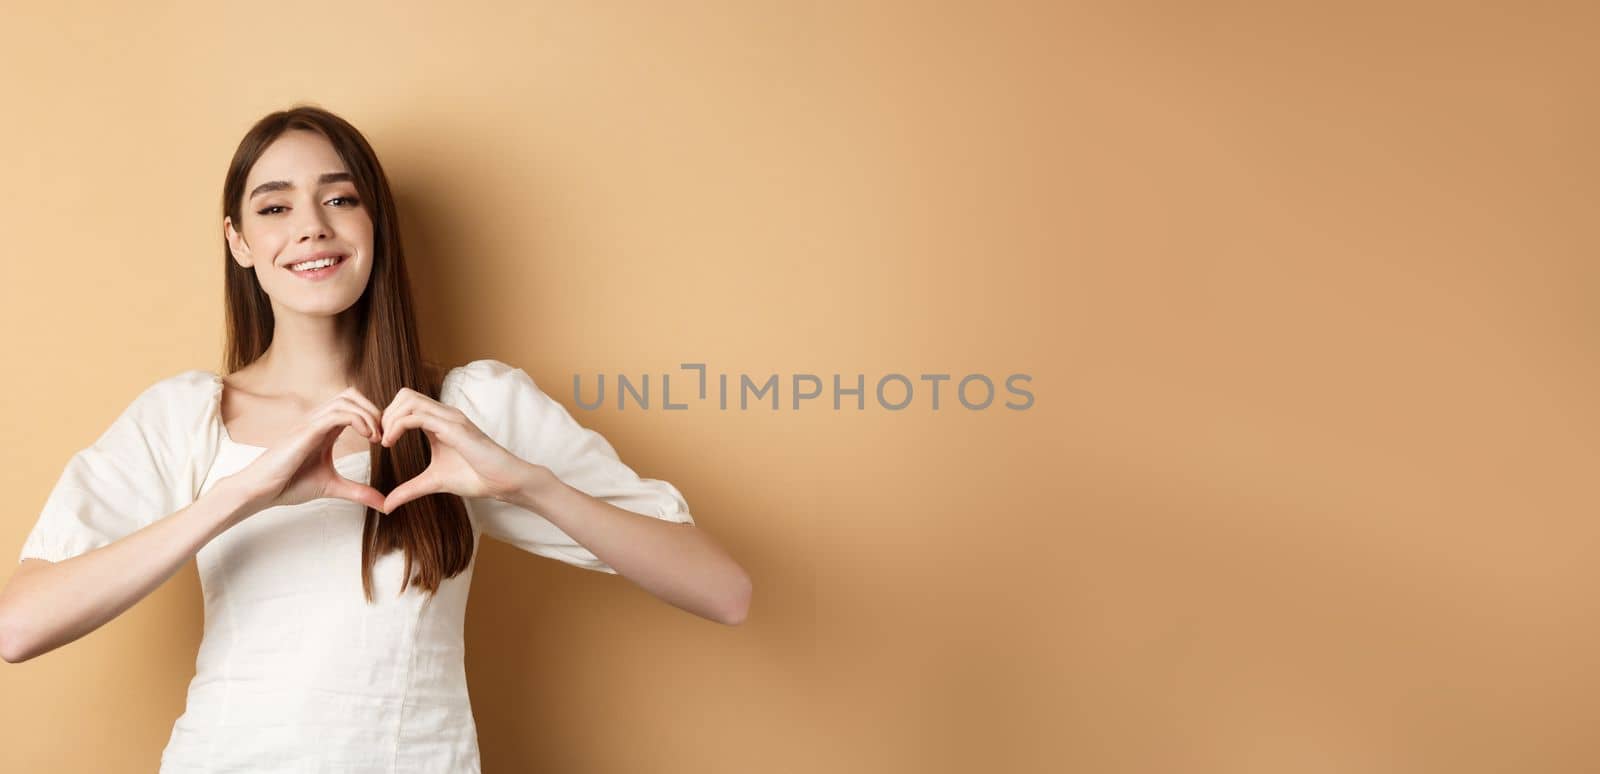 Valentines day. Attractive young girl in white dress smiling and showing heart gesture, standing on beige background. Copy space